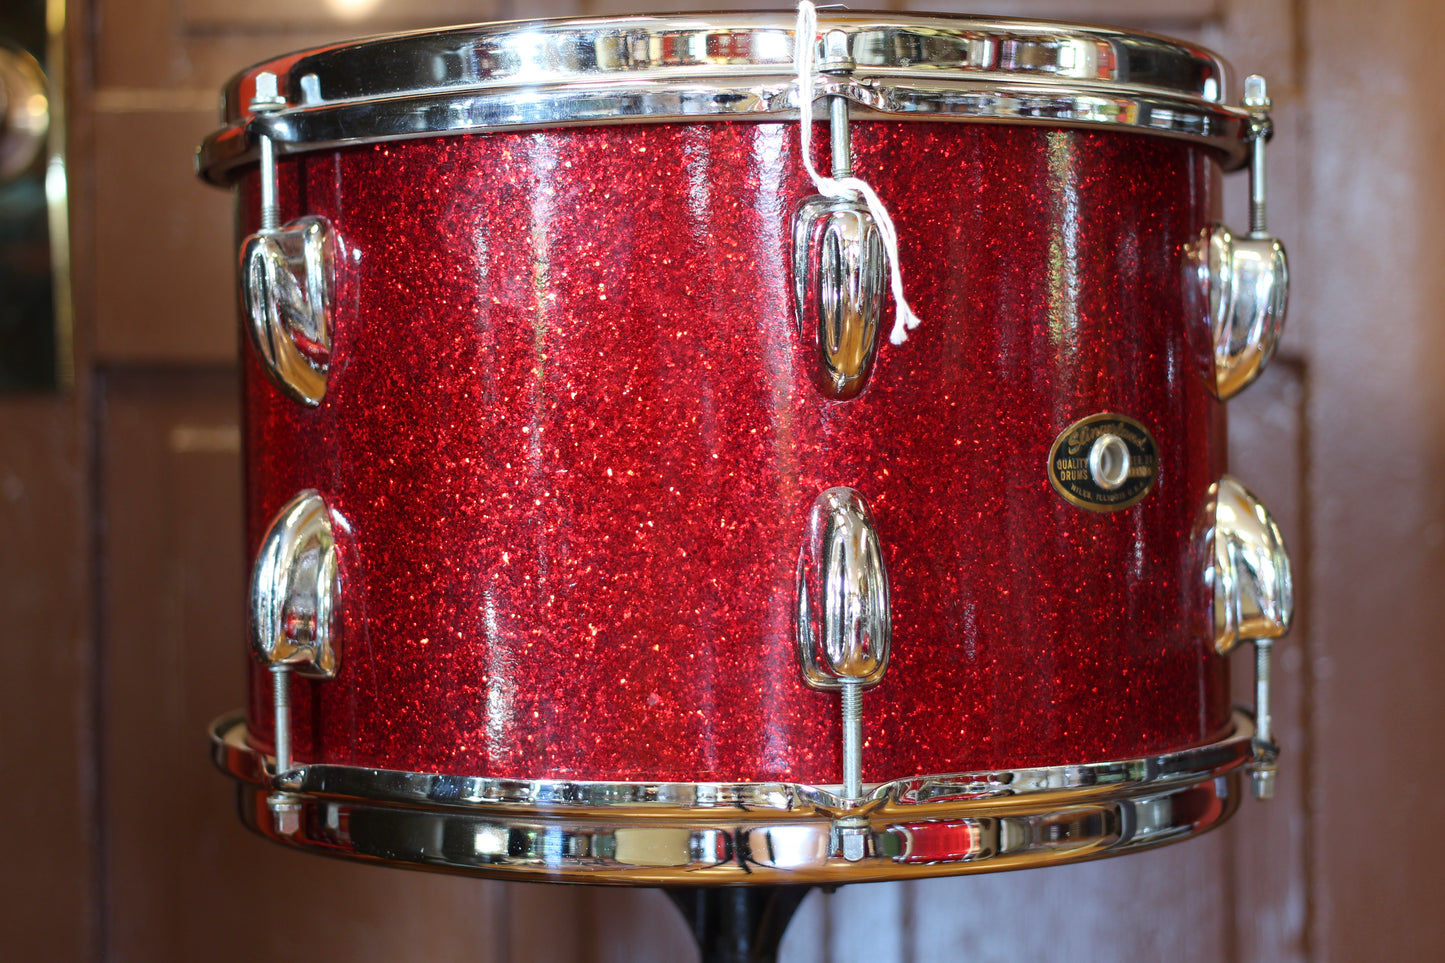 1966 Slingerland Modern Jazz outfit in Sparkling Red Pearl